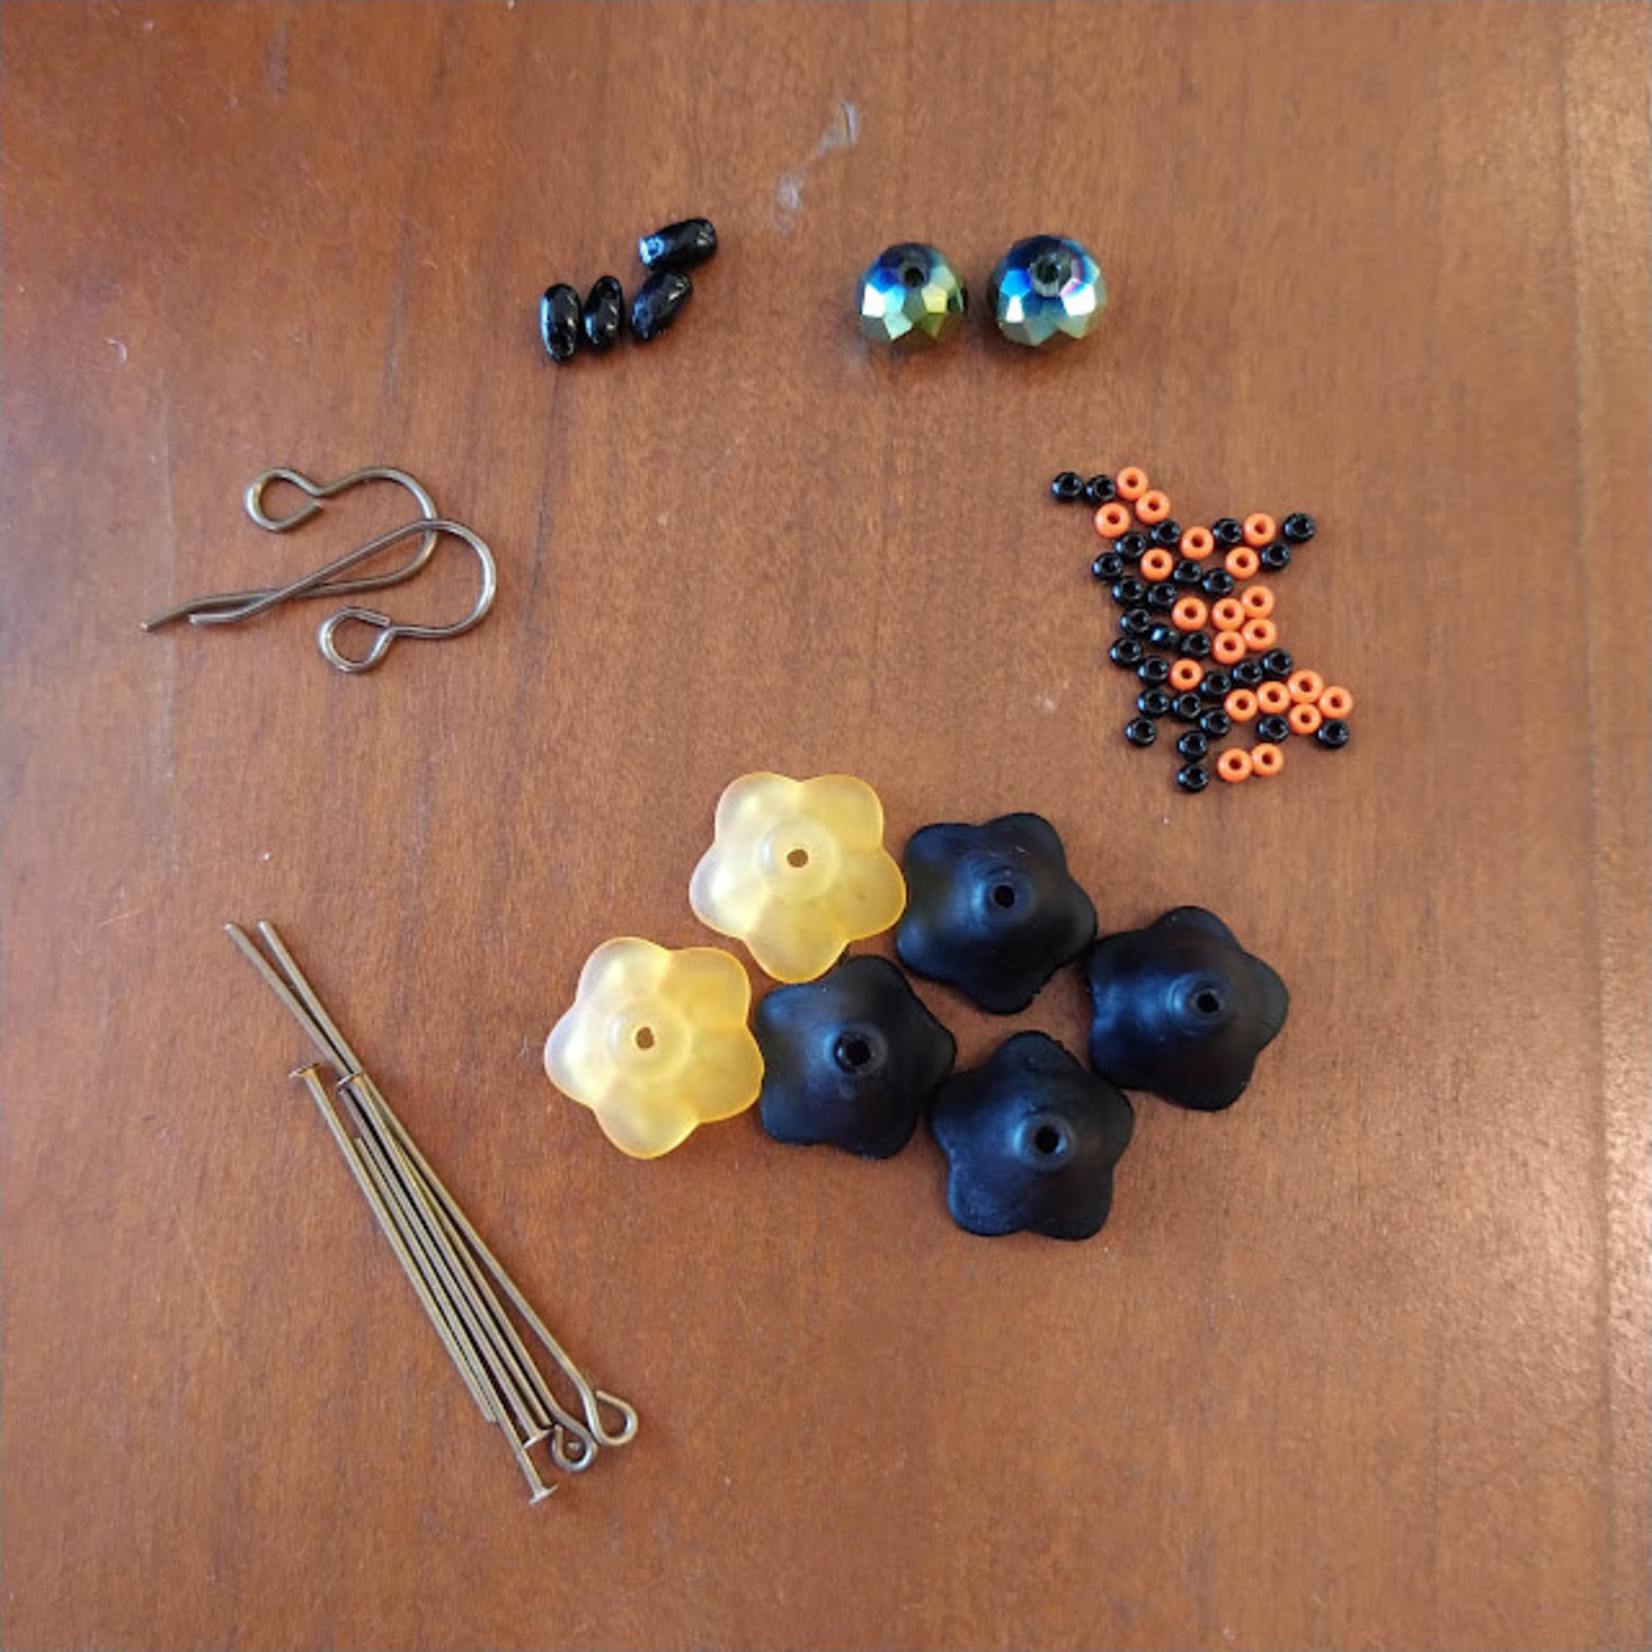 Merry Witch Earring Kit - Bead Inspirations